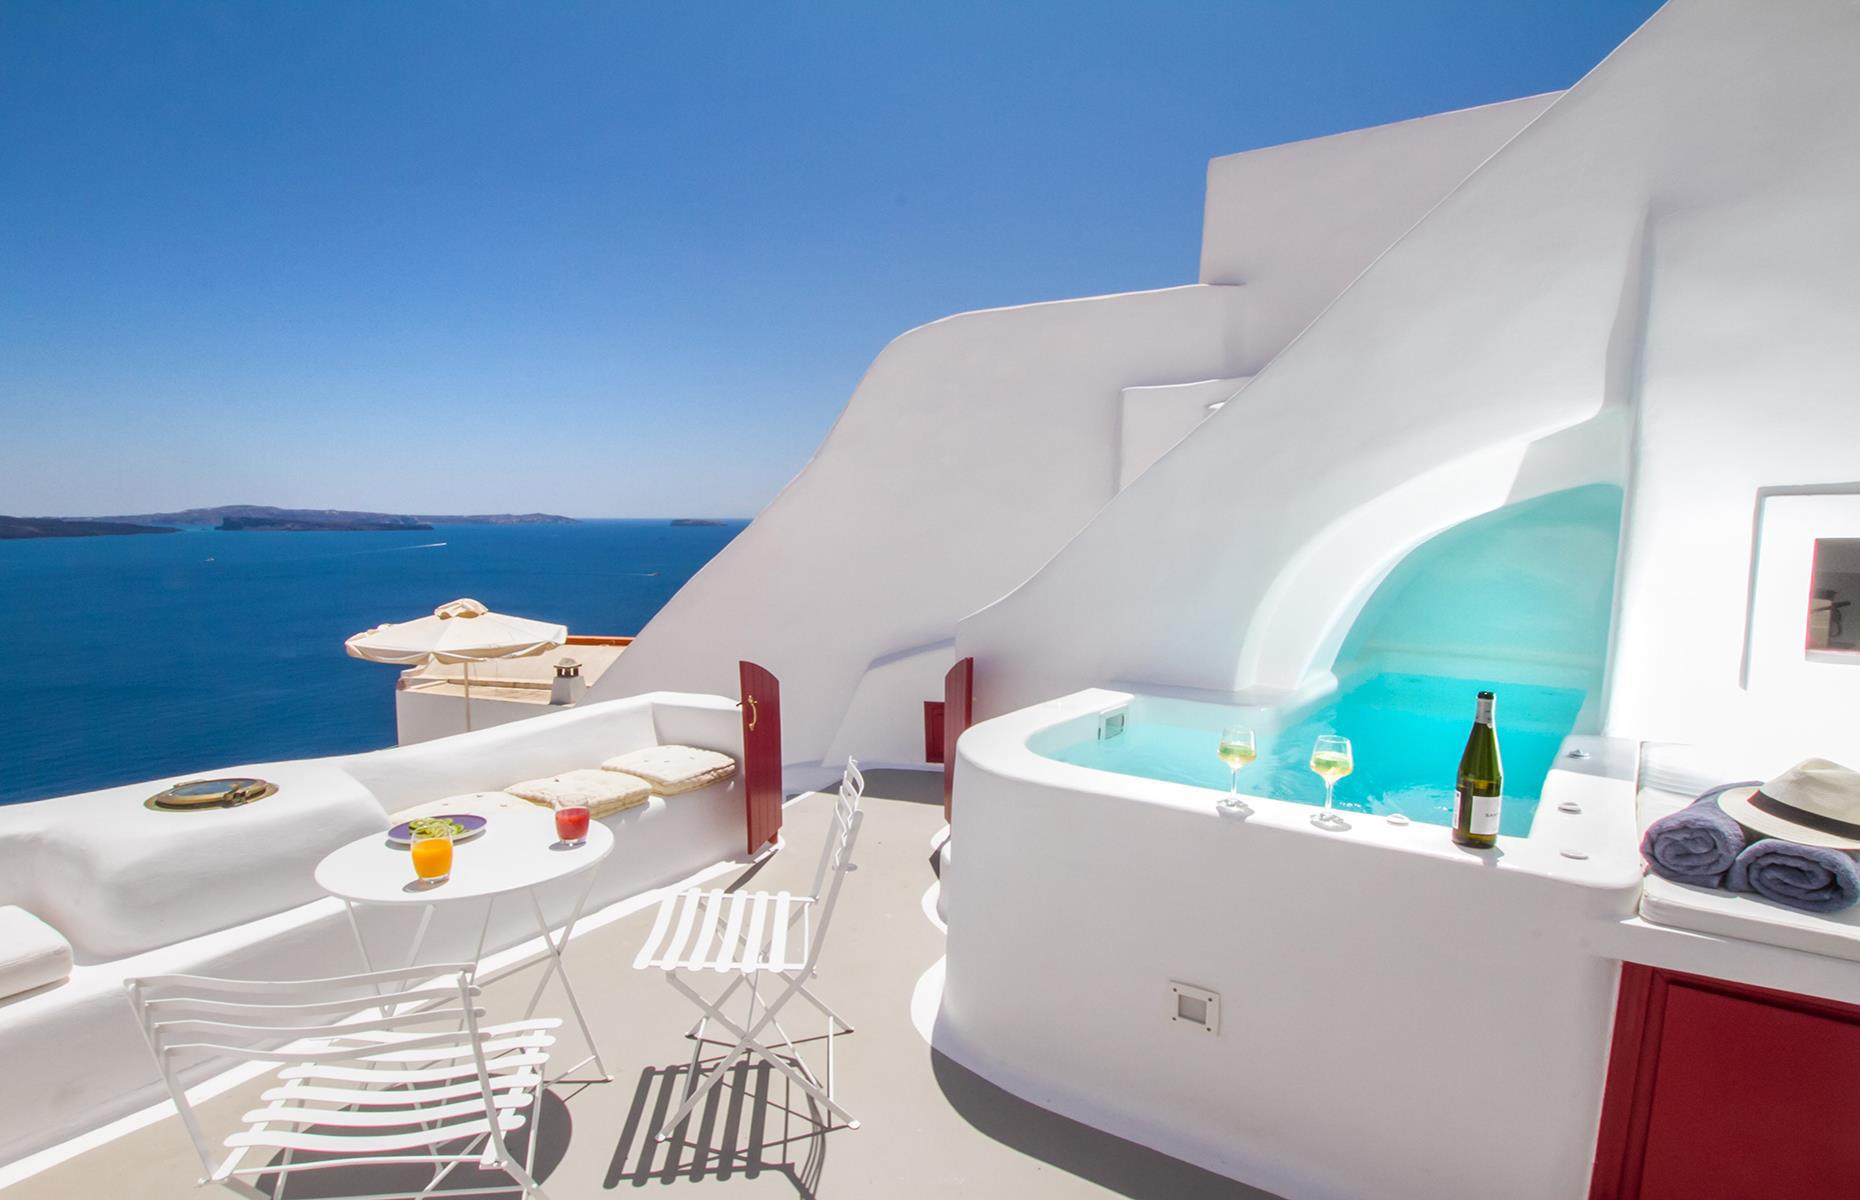 <p>At <a href="https://www.airbnb.co.uk/rooms/433392">Hector Cave House</a> guests can soak up the staggering sight of the Santorini caldera from the private plunge pool. The house, which was once a wine cellar, was carved into the cliff face more than 250 years ago. The stylish interior has two bathrooms, a seating area with a flatscreen TV and space to sleep five.</p>